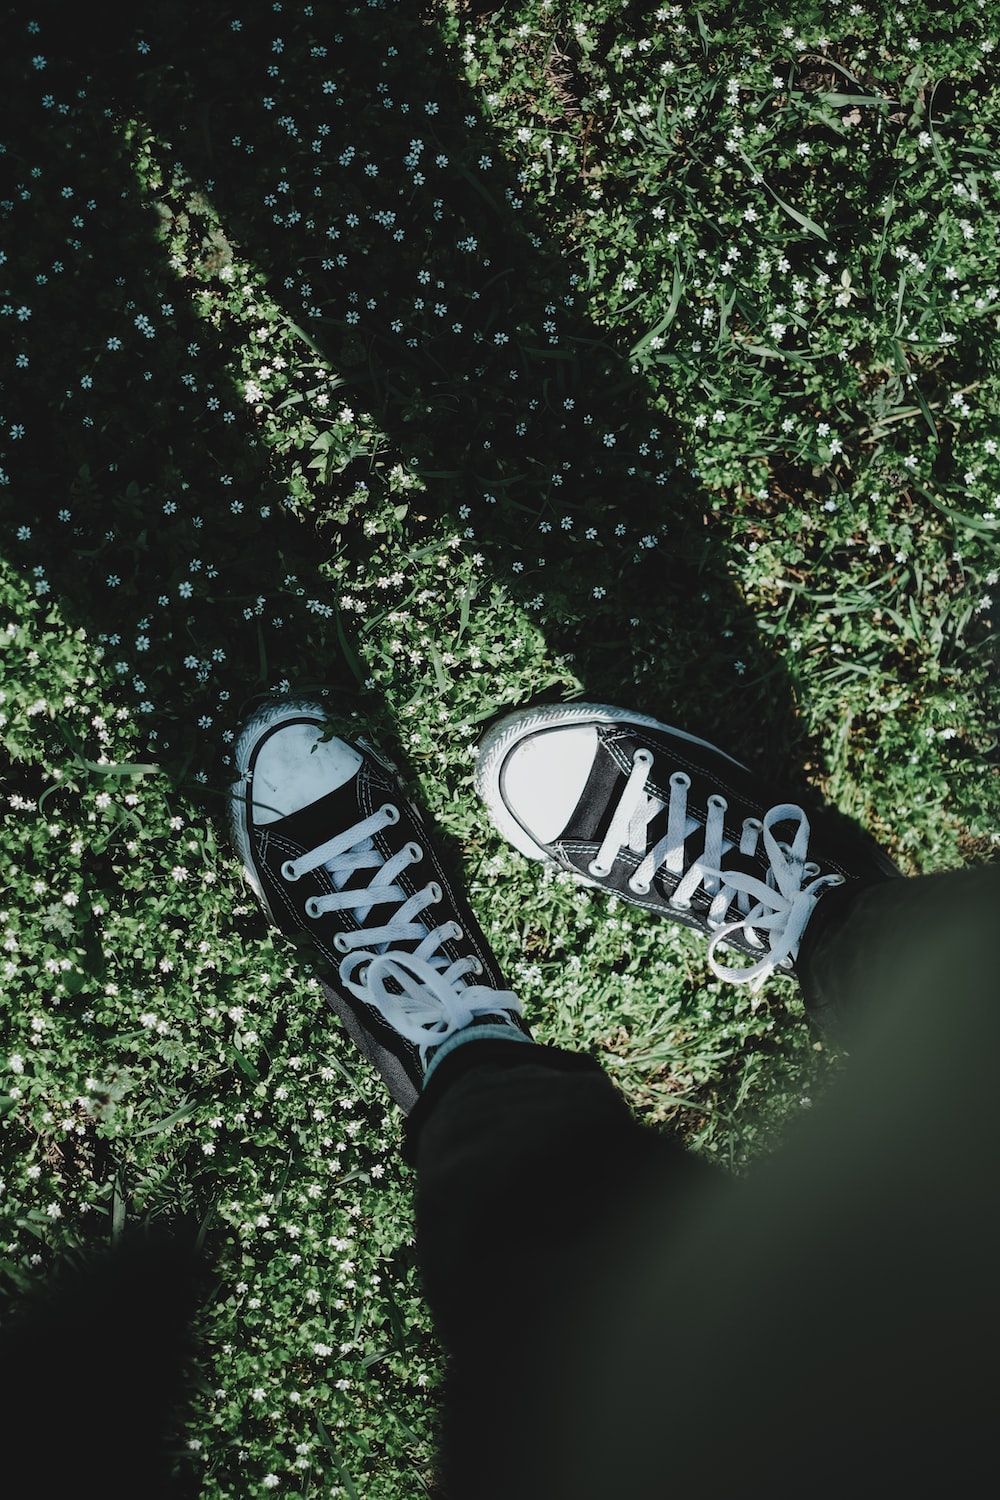 Person wearing black and white converse all star high top sneakers standing on grass - Converse